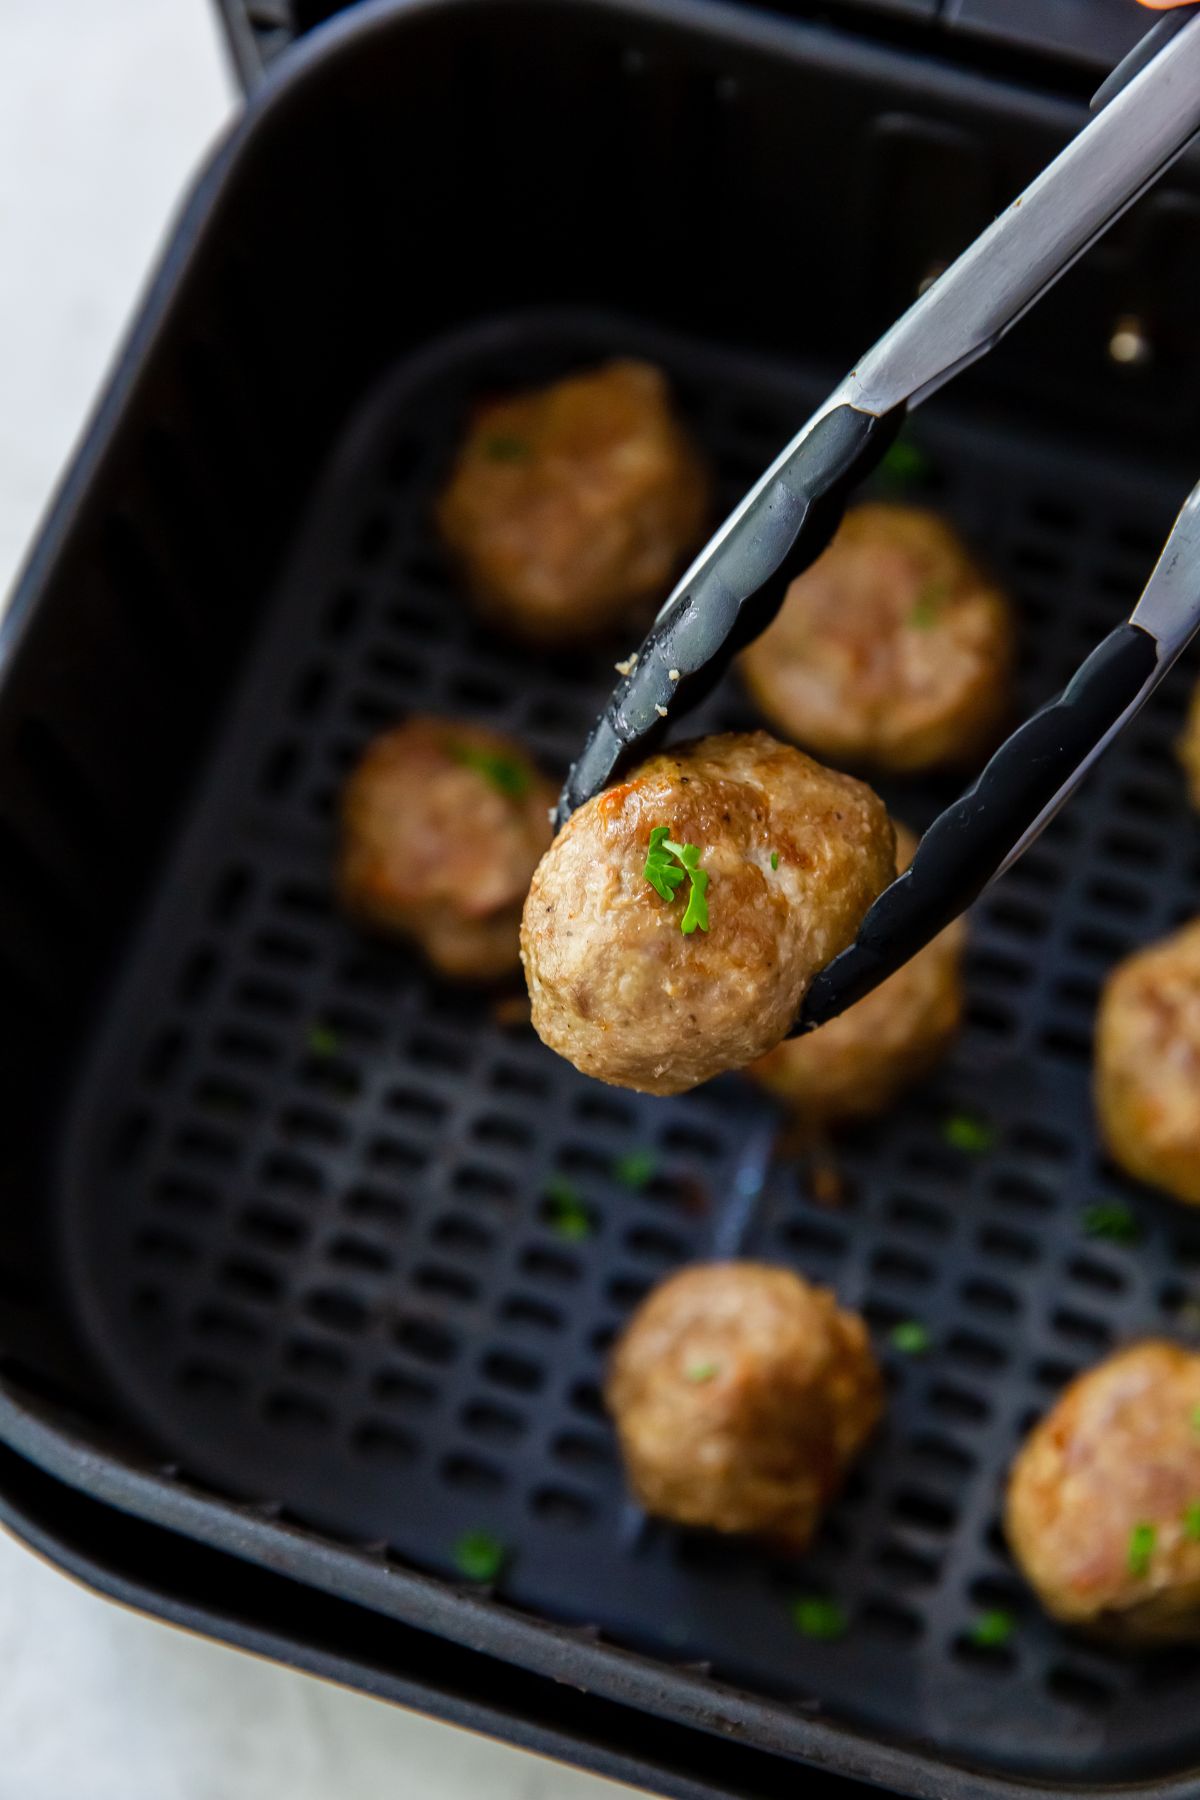 Cooked frozen meatball in the air fryer basket with a meatball in tongs